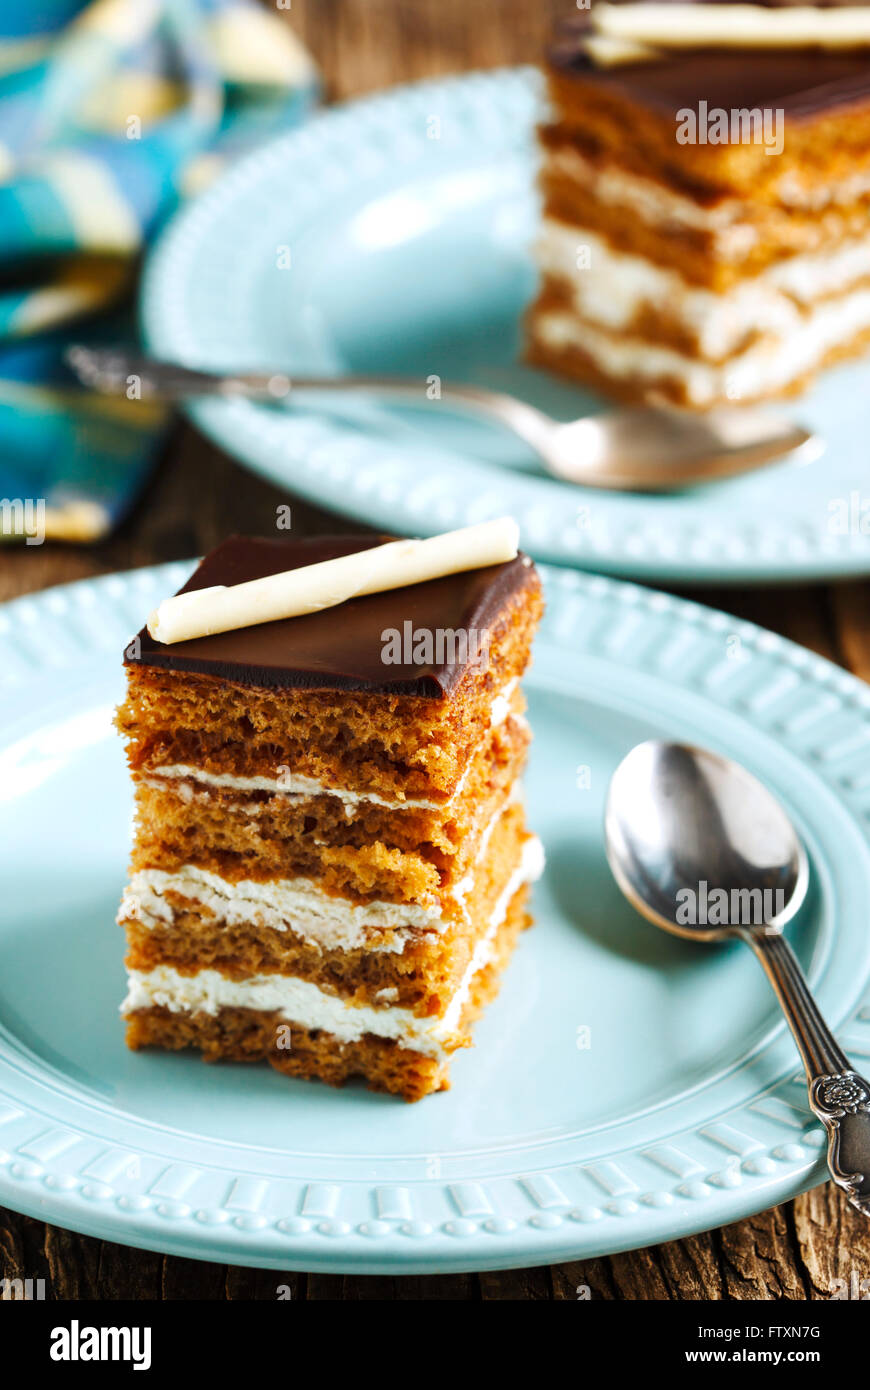 Piece of honey cake on a plate Stock Photo